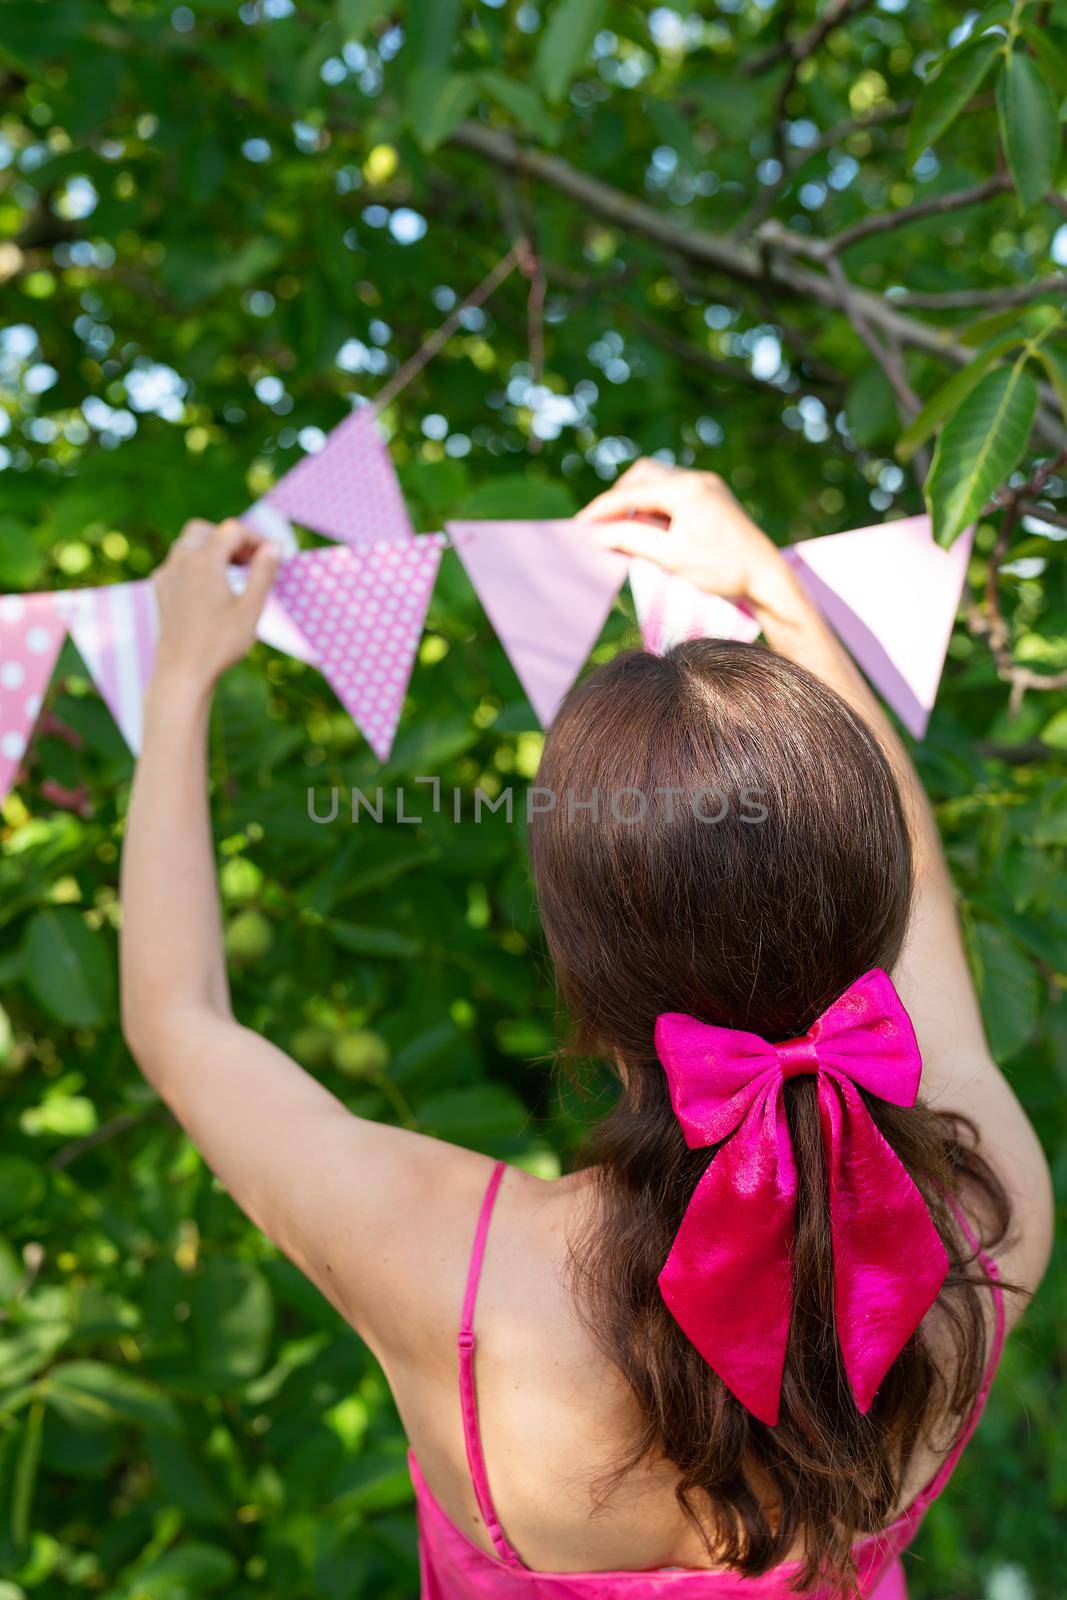 The girl hangs triangular flags of pink color against the backdrop of a green garden. A girl in a pink dress and a bow on her hair. Festive decor - celebration concept. by sfinks